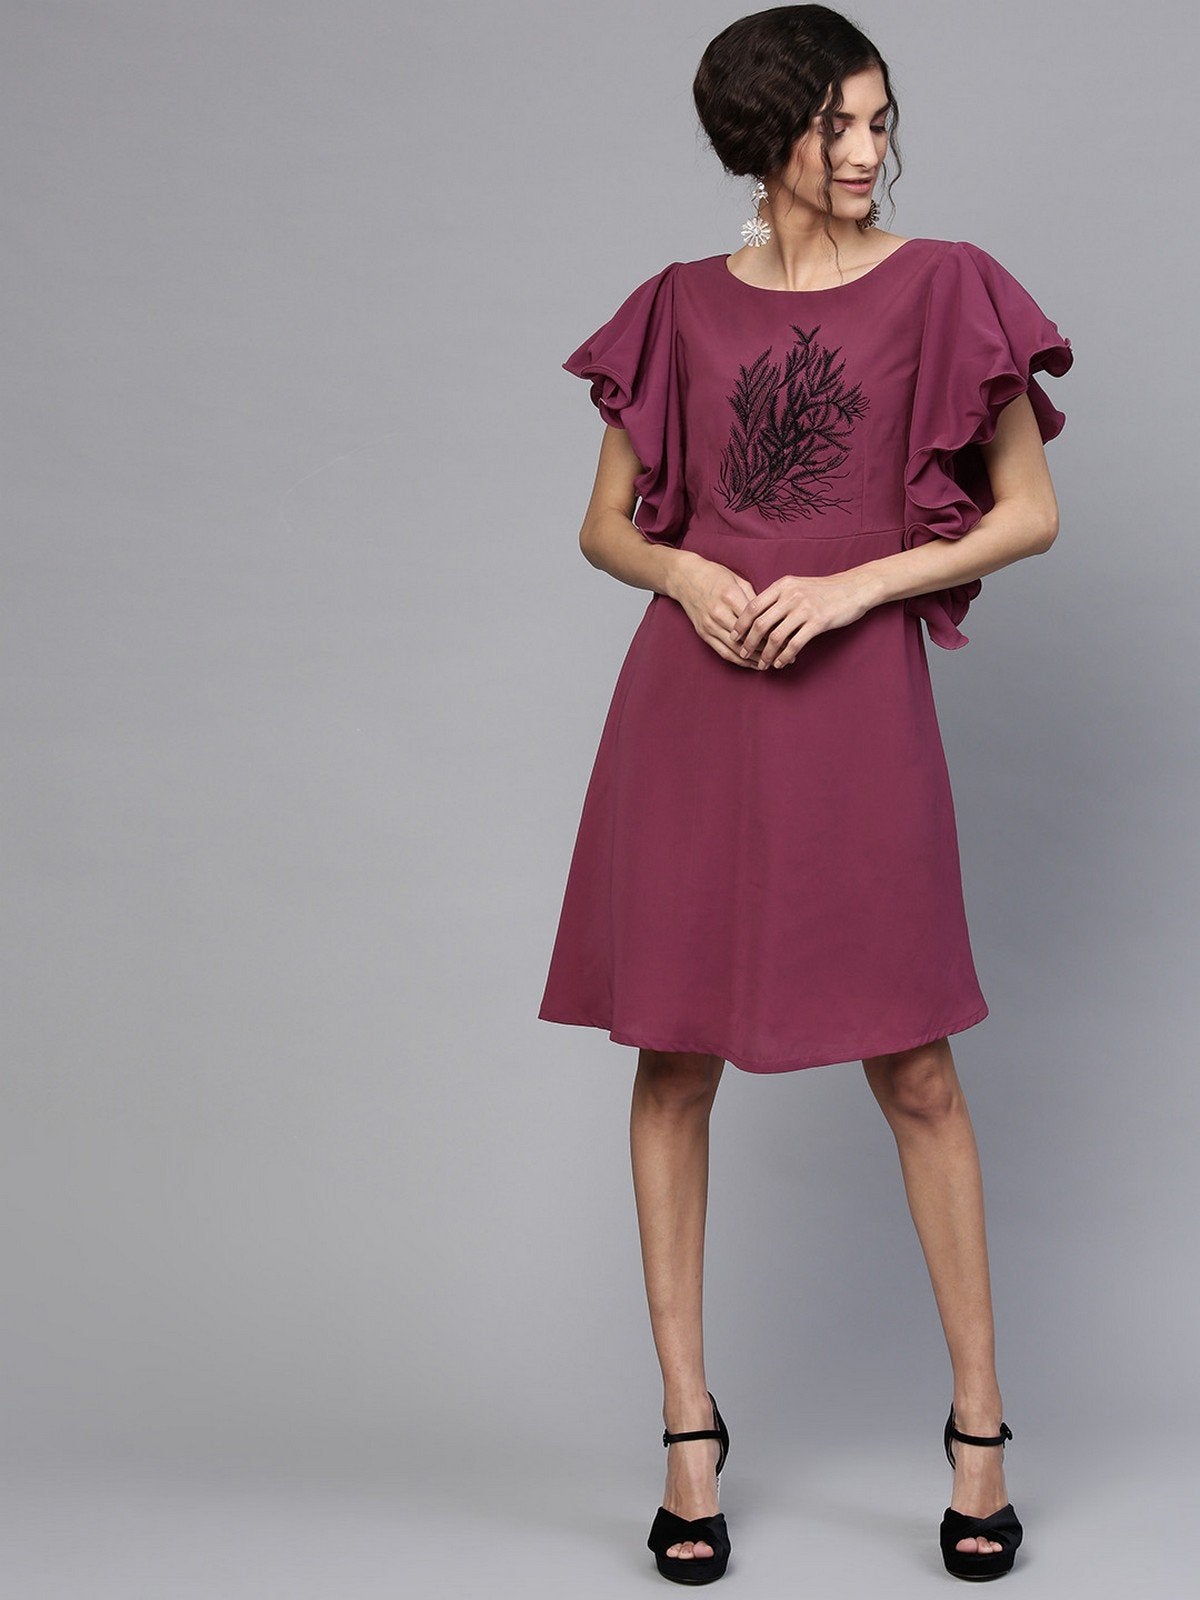 Women's Embroidered Frill And Flare Dress - Pannkh